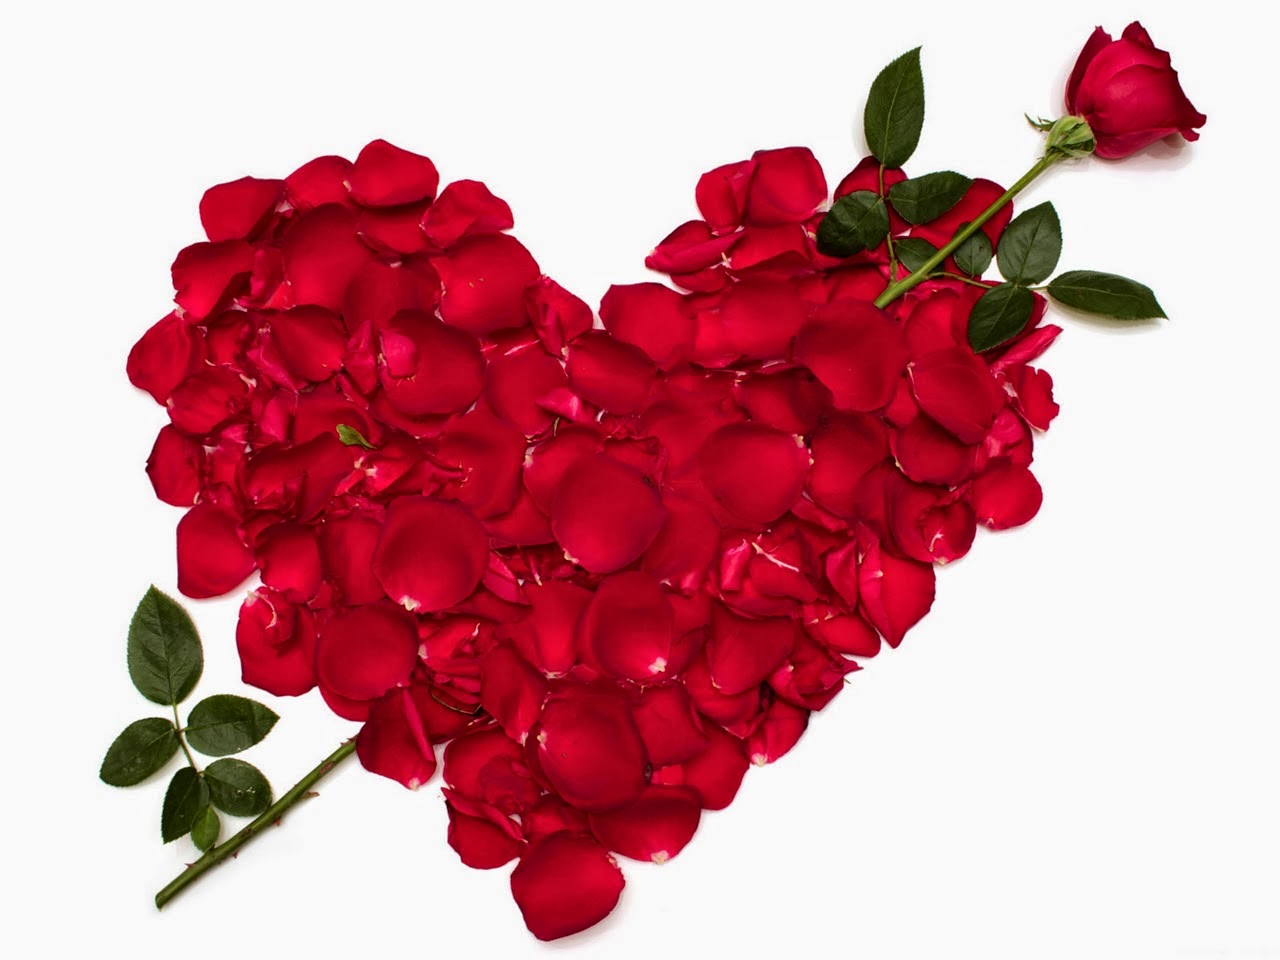 Rose day status & messages for whatsapp and Facebook